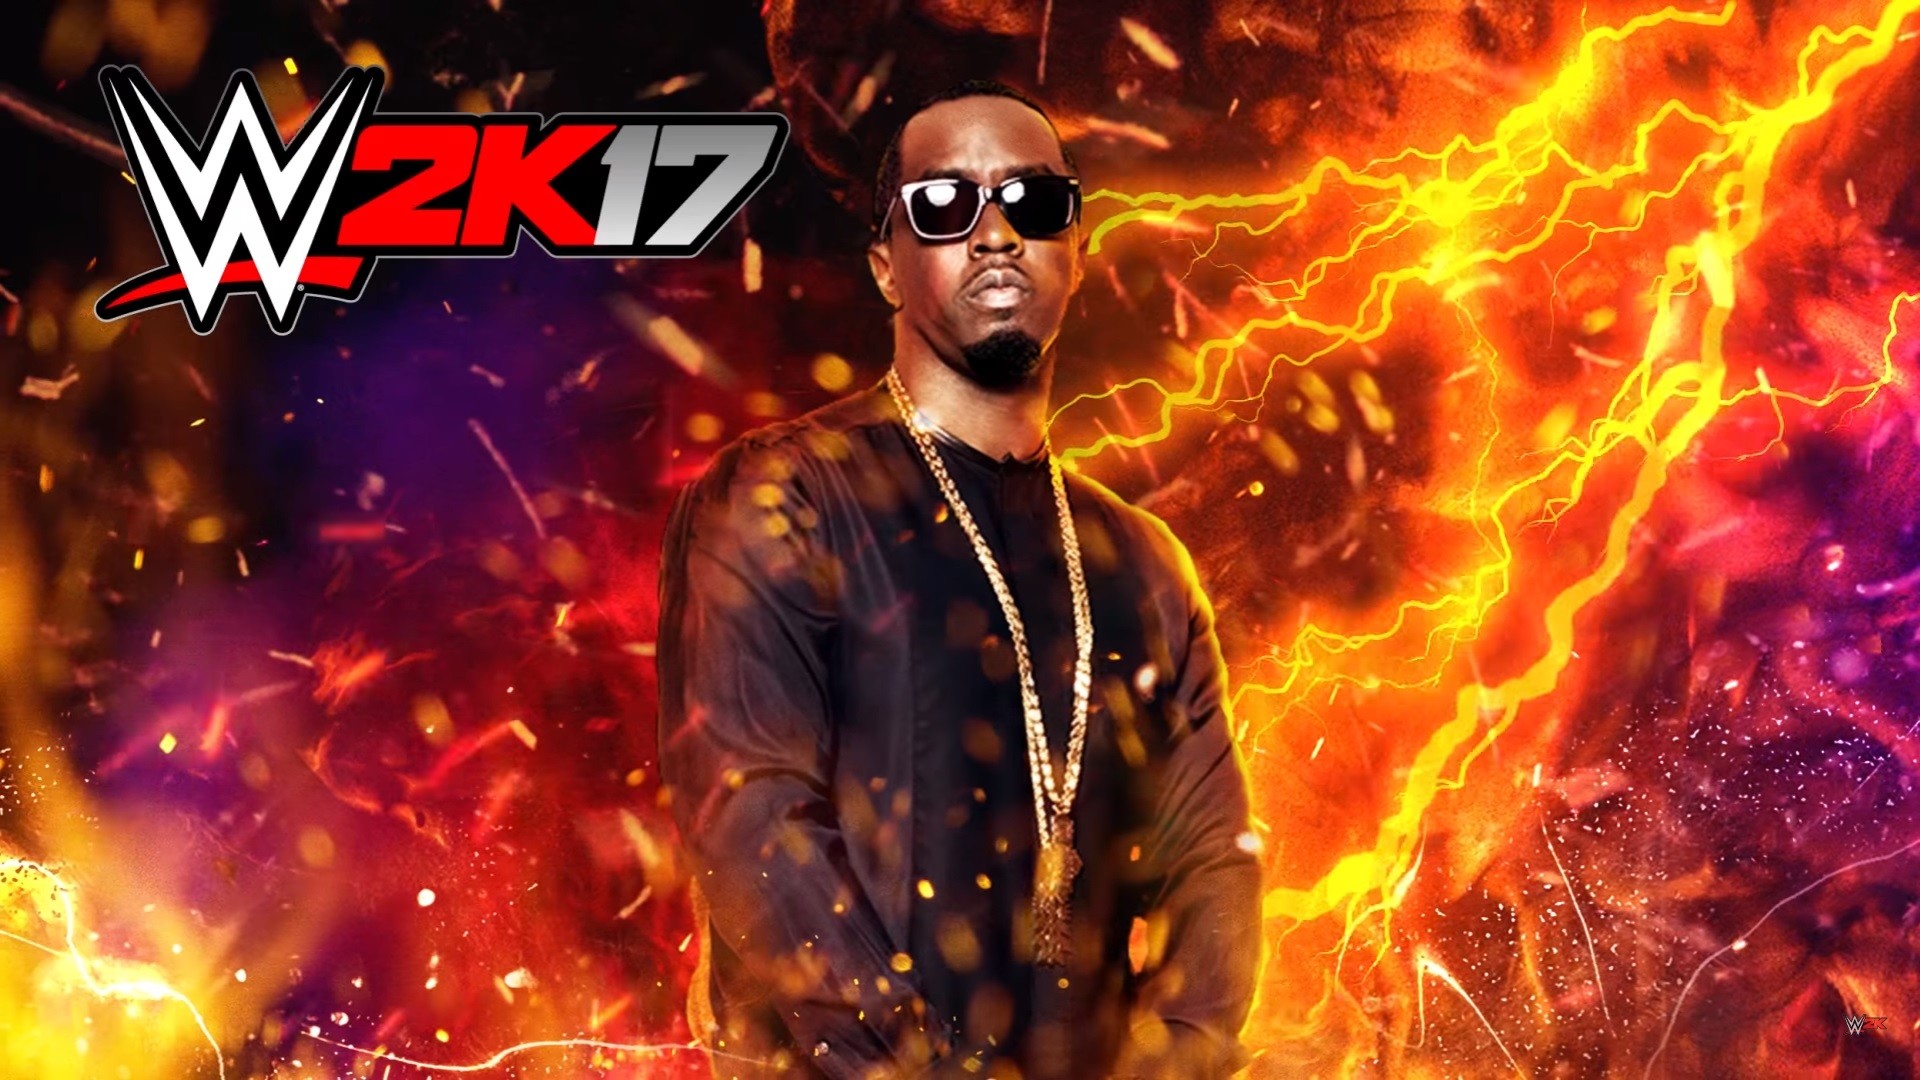 1920x1080 WWE 2K17 soundtrack announced, curated by Sean “Diddy” Combs